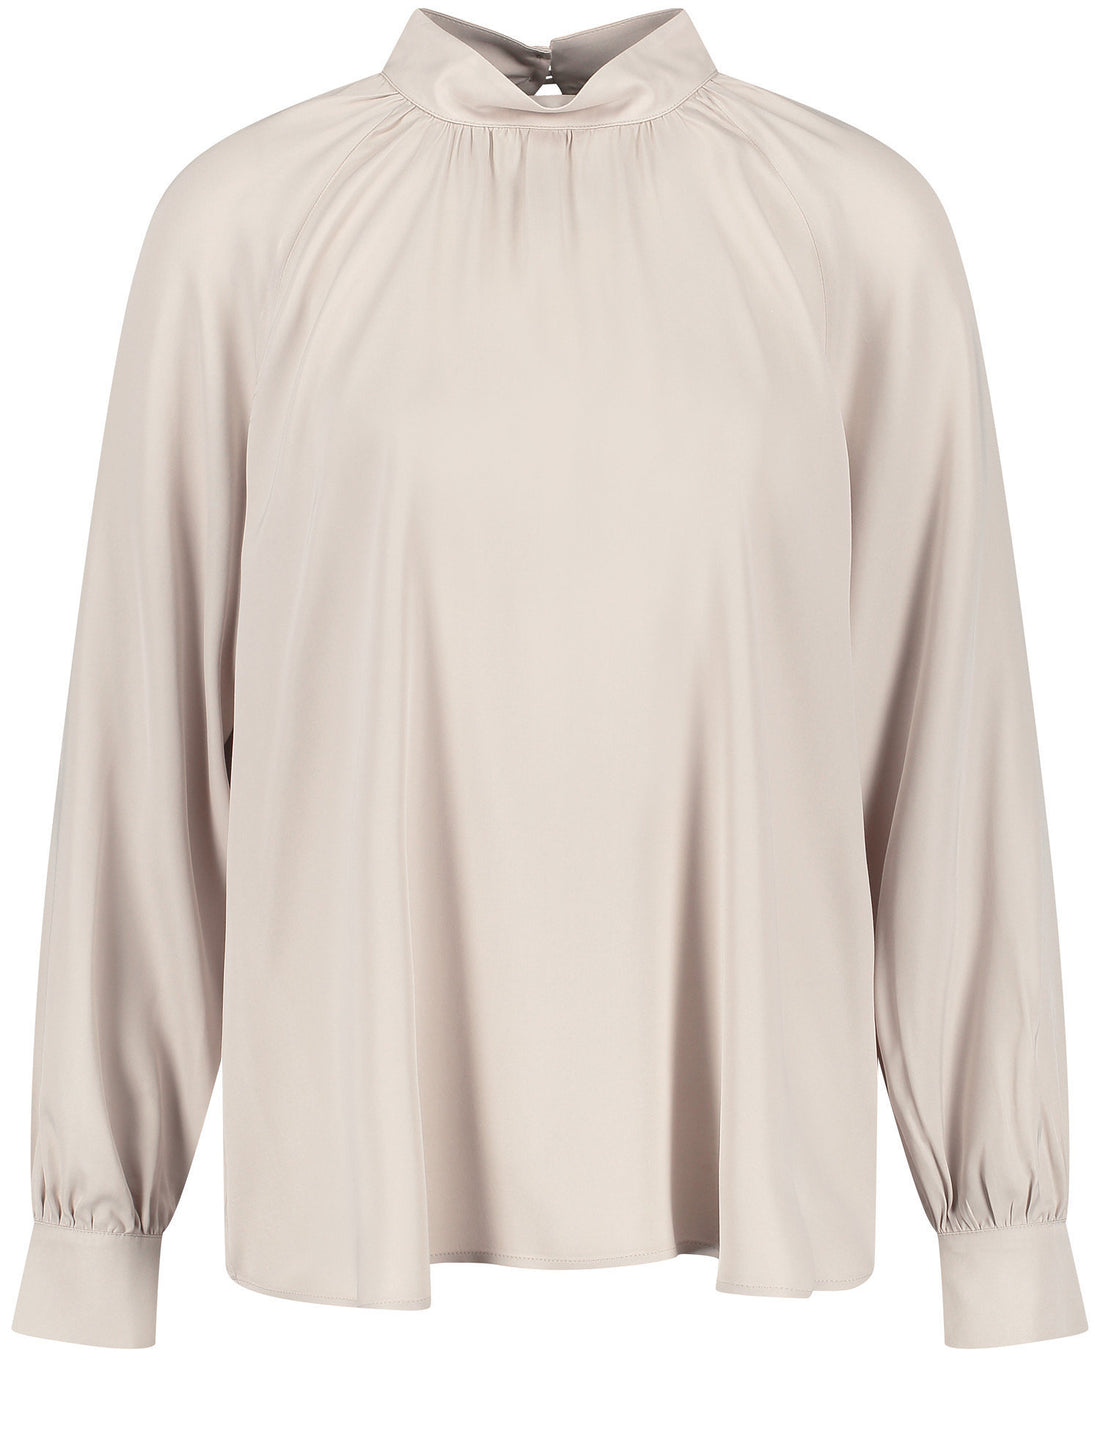 Blouse With A Stand-Up Collar_260016-31410_90544_02